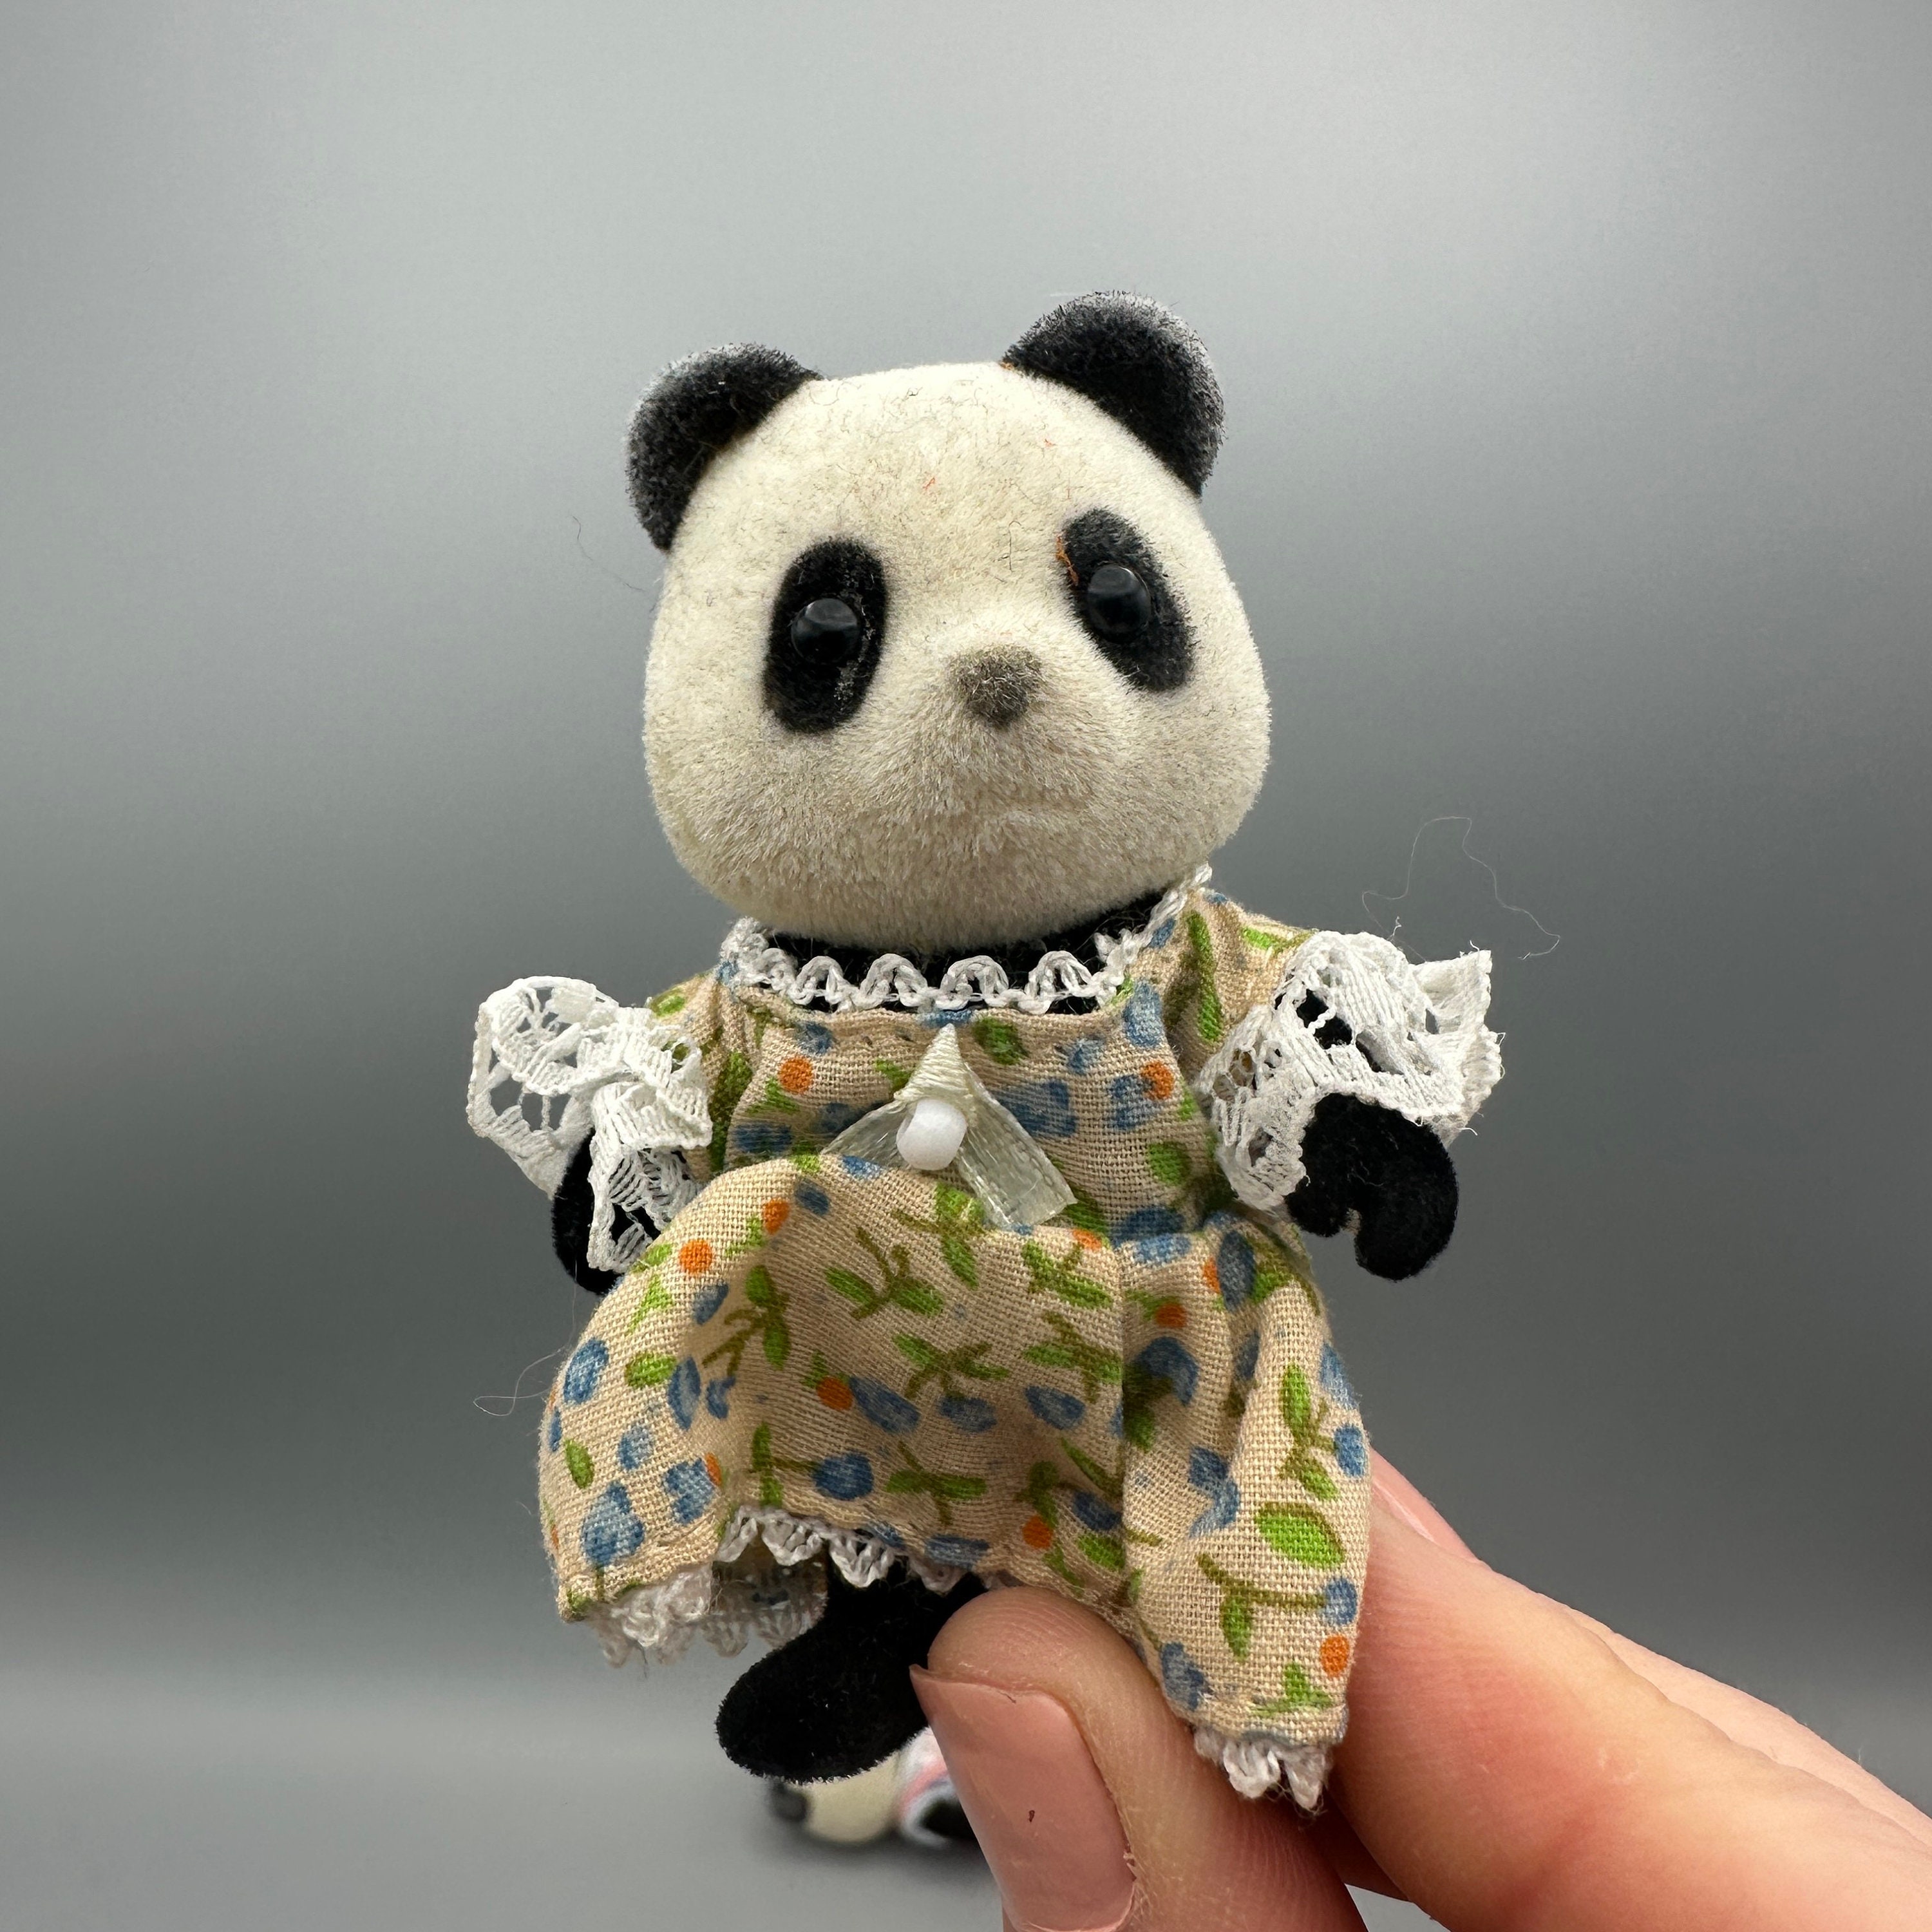 Used] PANDA FAMILY 2885 Epoch Sylvanian Families Calico Critters